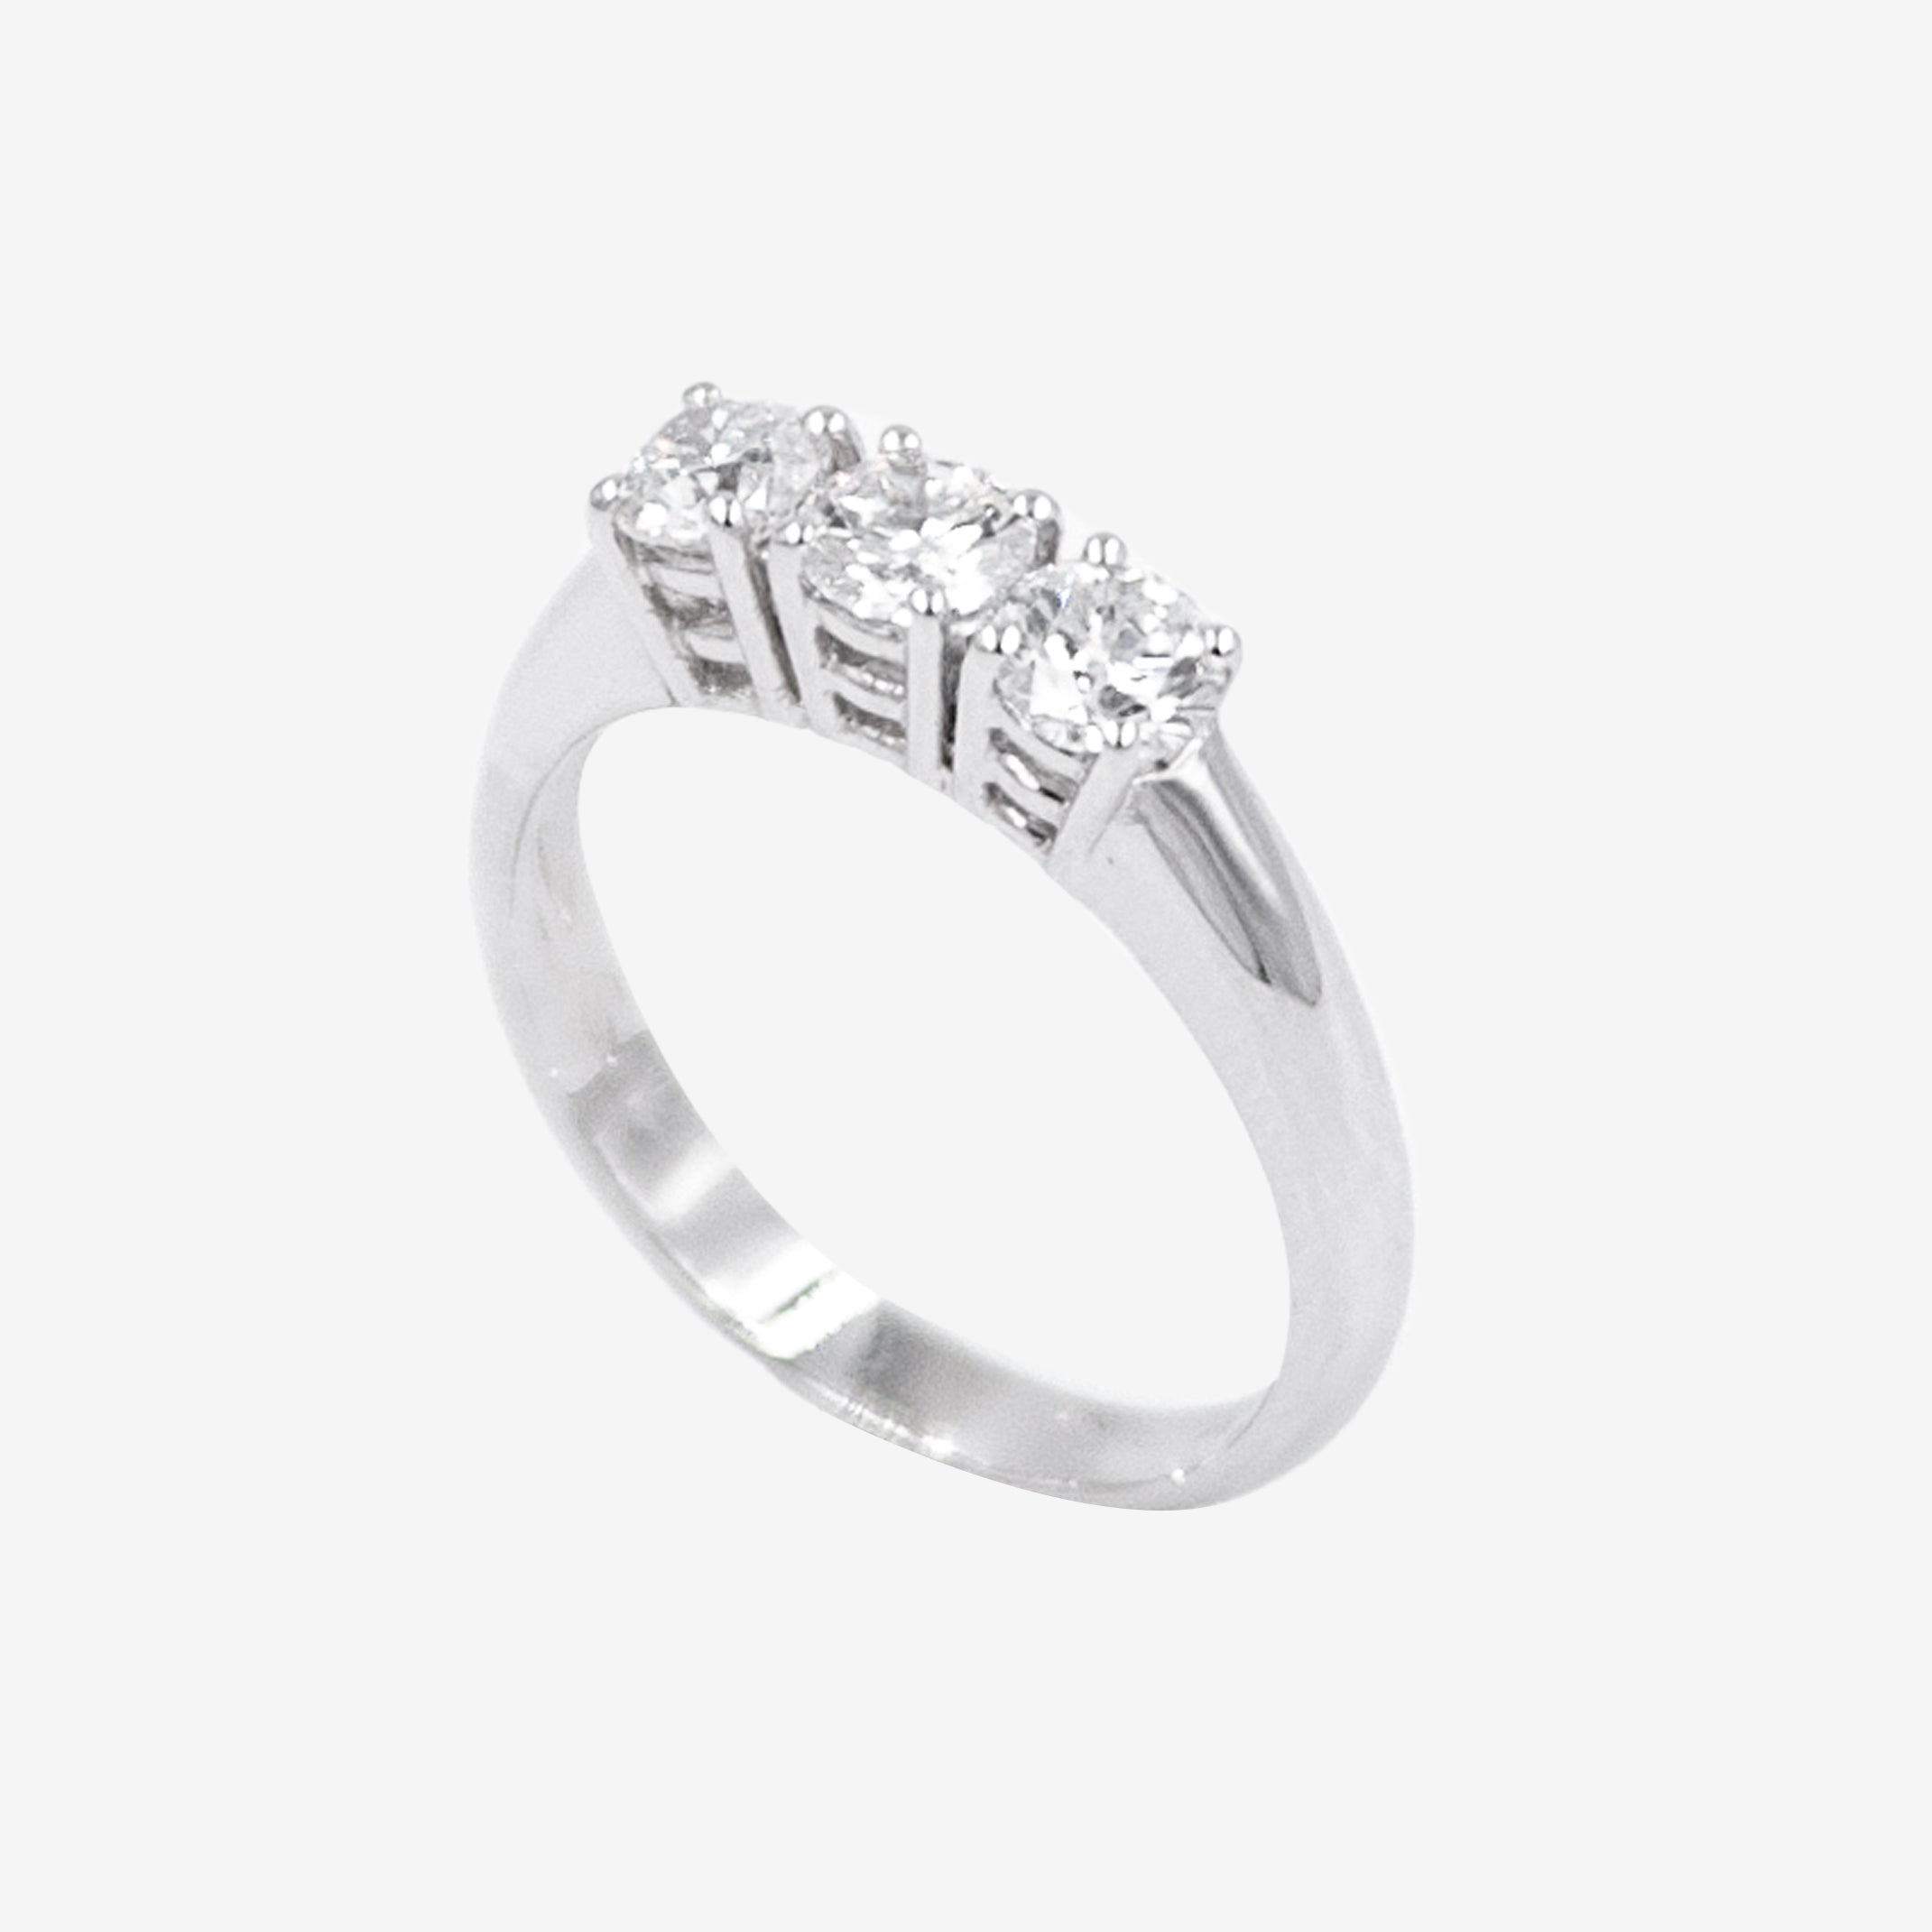 Trilogy ring with diamonds